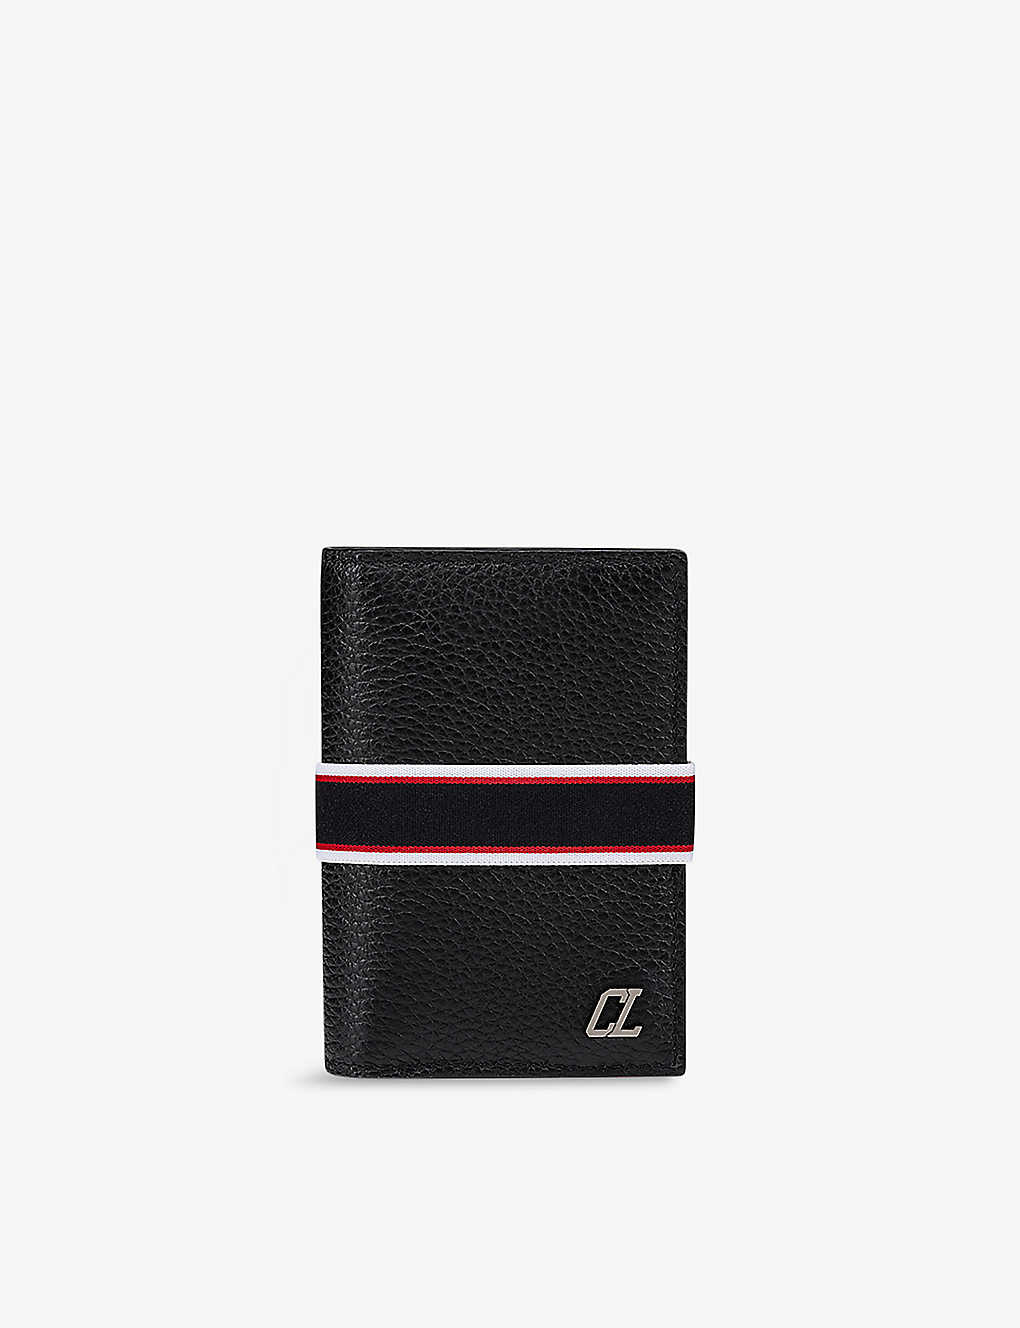 Christian Louboutin Black F.a.v. Brand-band Grained-leather Card Holder